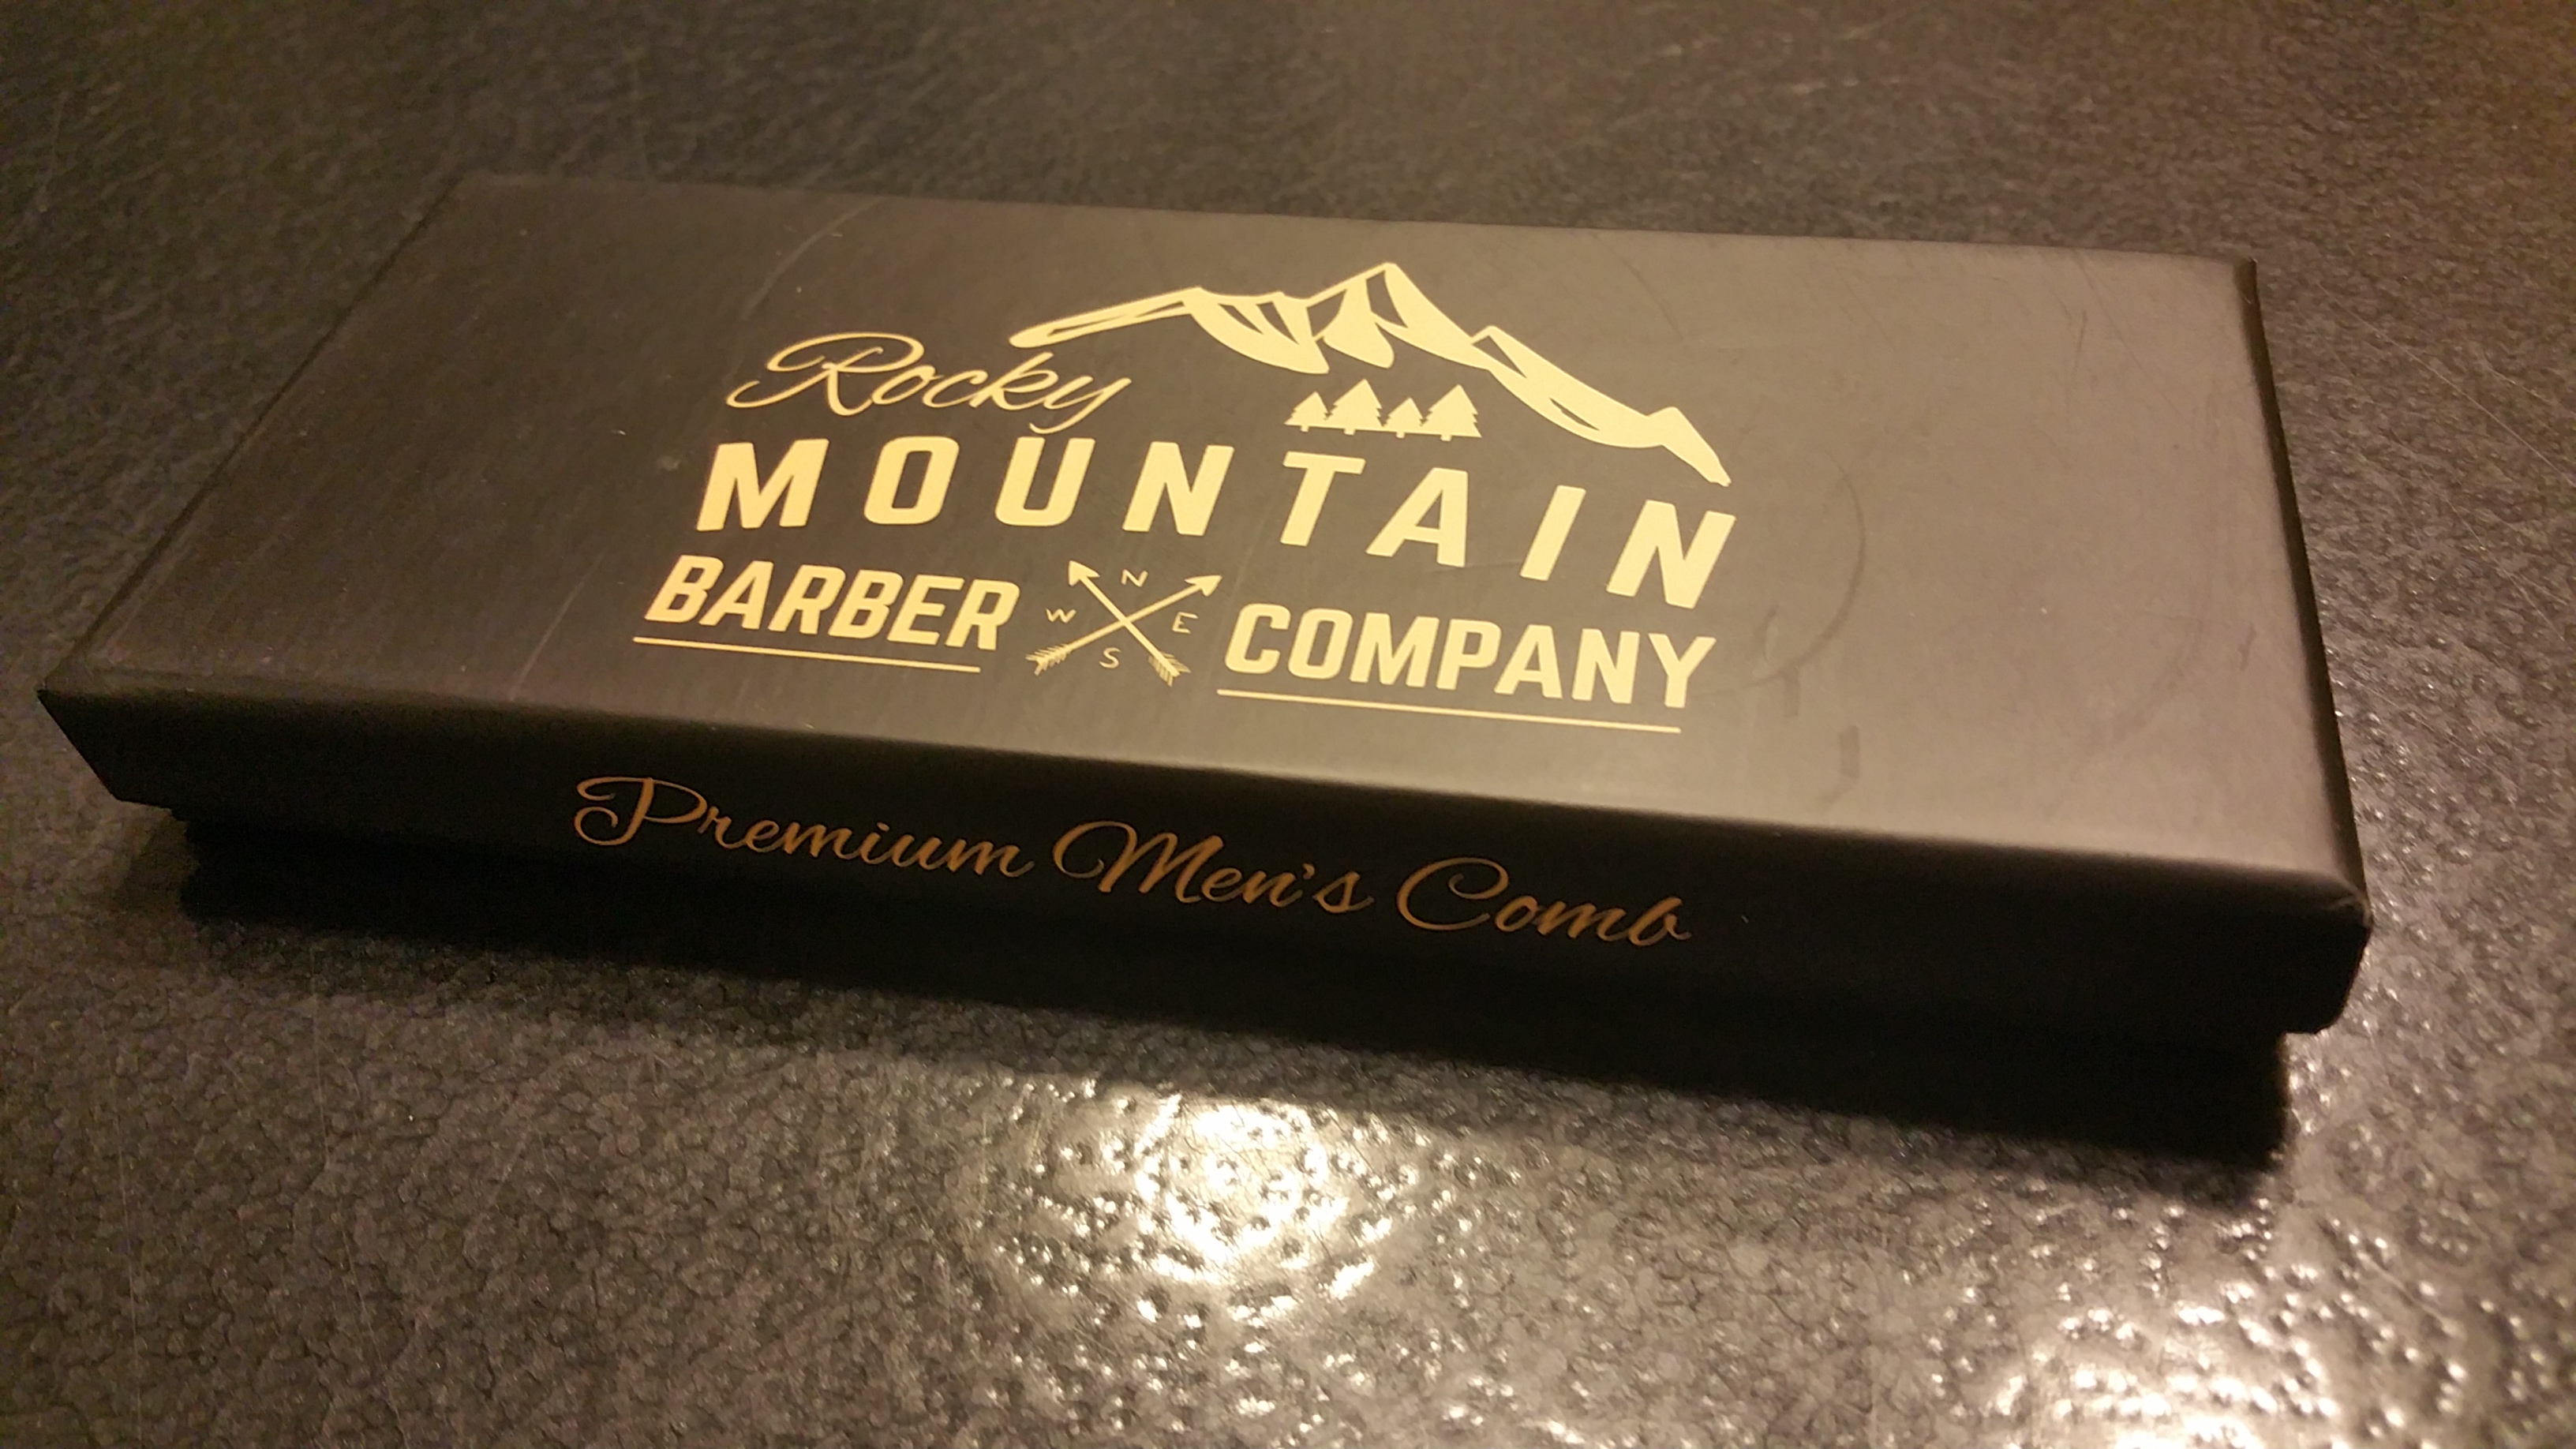 Stylish and convenient comb by the Rocky Mountain Barber Company